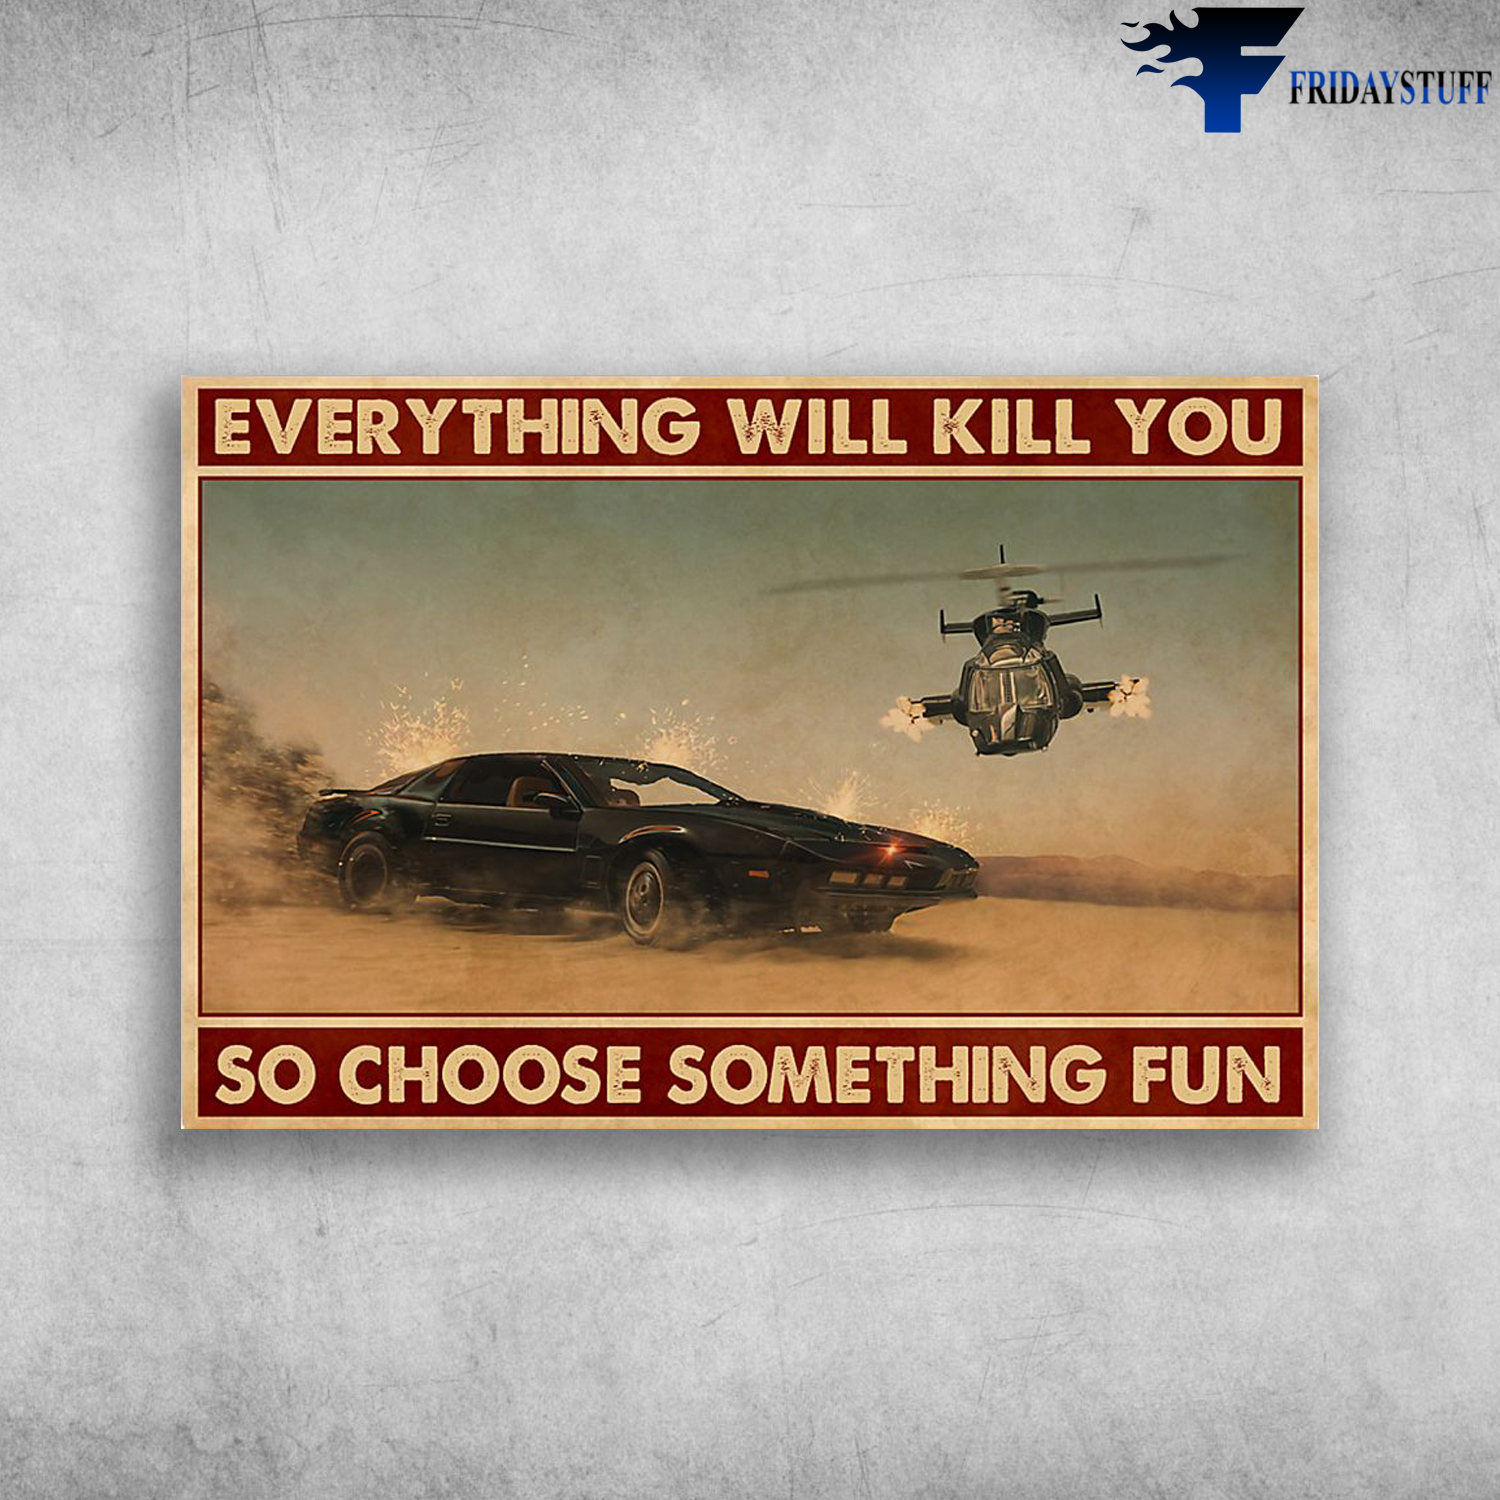 Helicopters Shooting The Cars - Everything Will Kill You, So Choose Something Fun